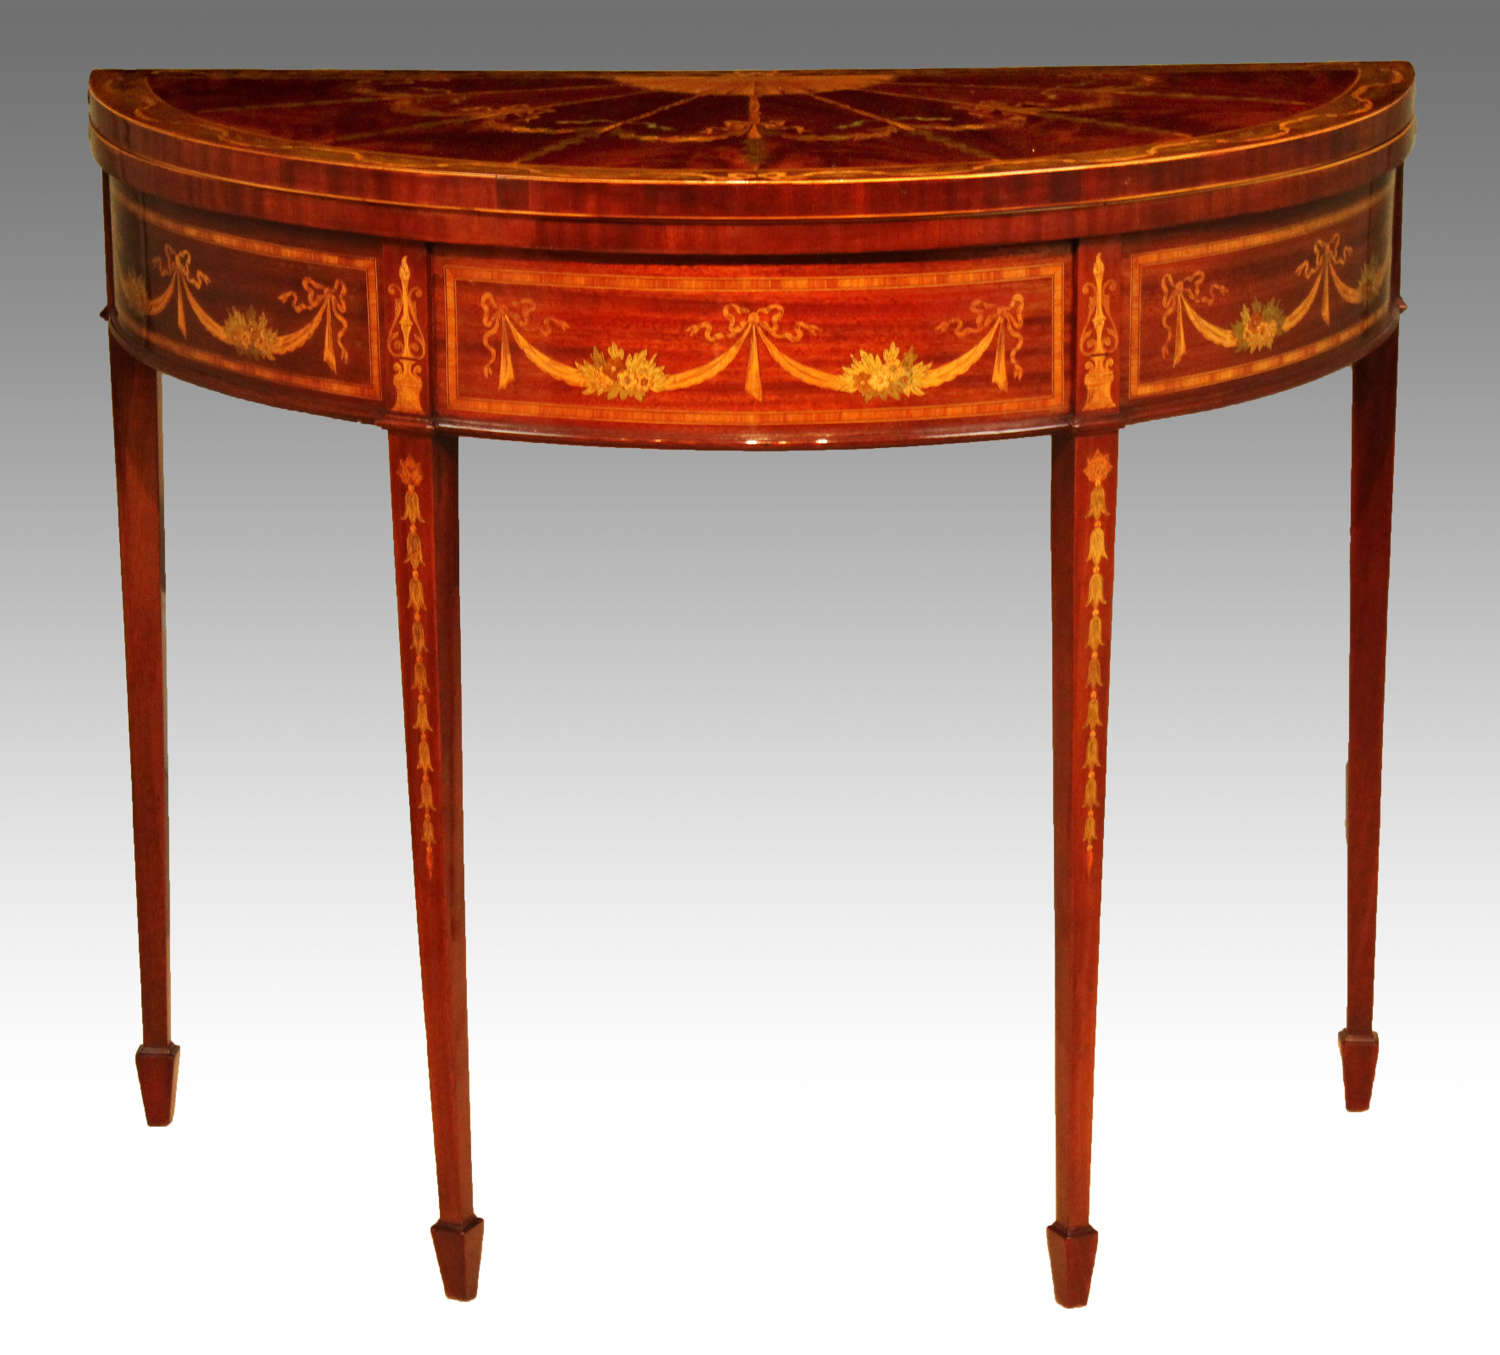 A Quality Late Victorian Mahogany Inlaid Demi-lune Card Table.